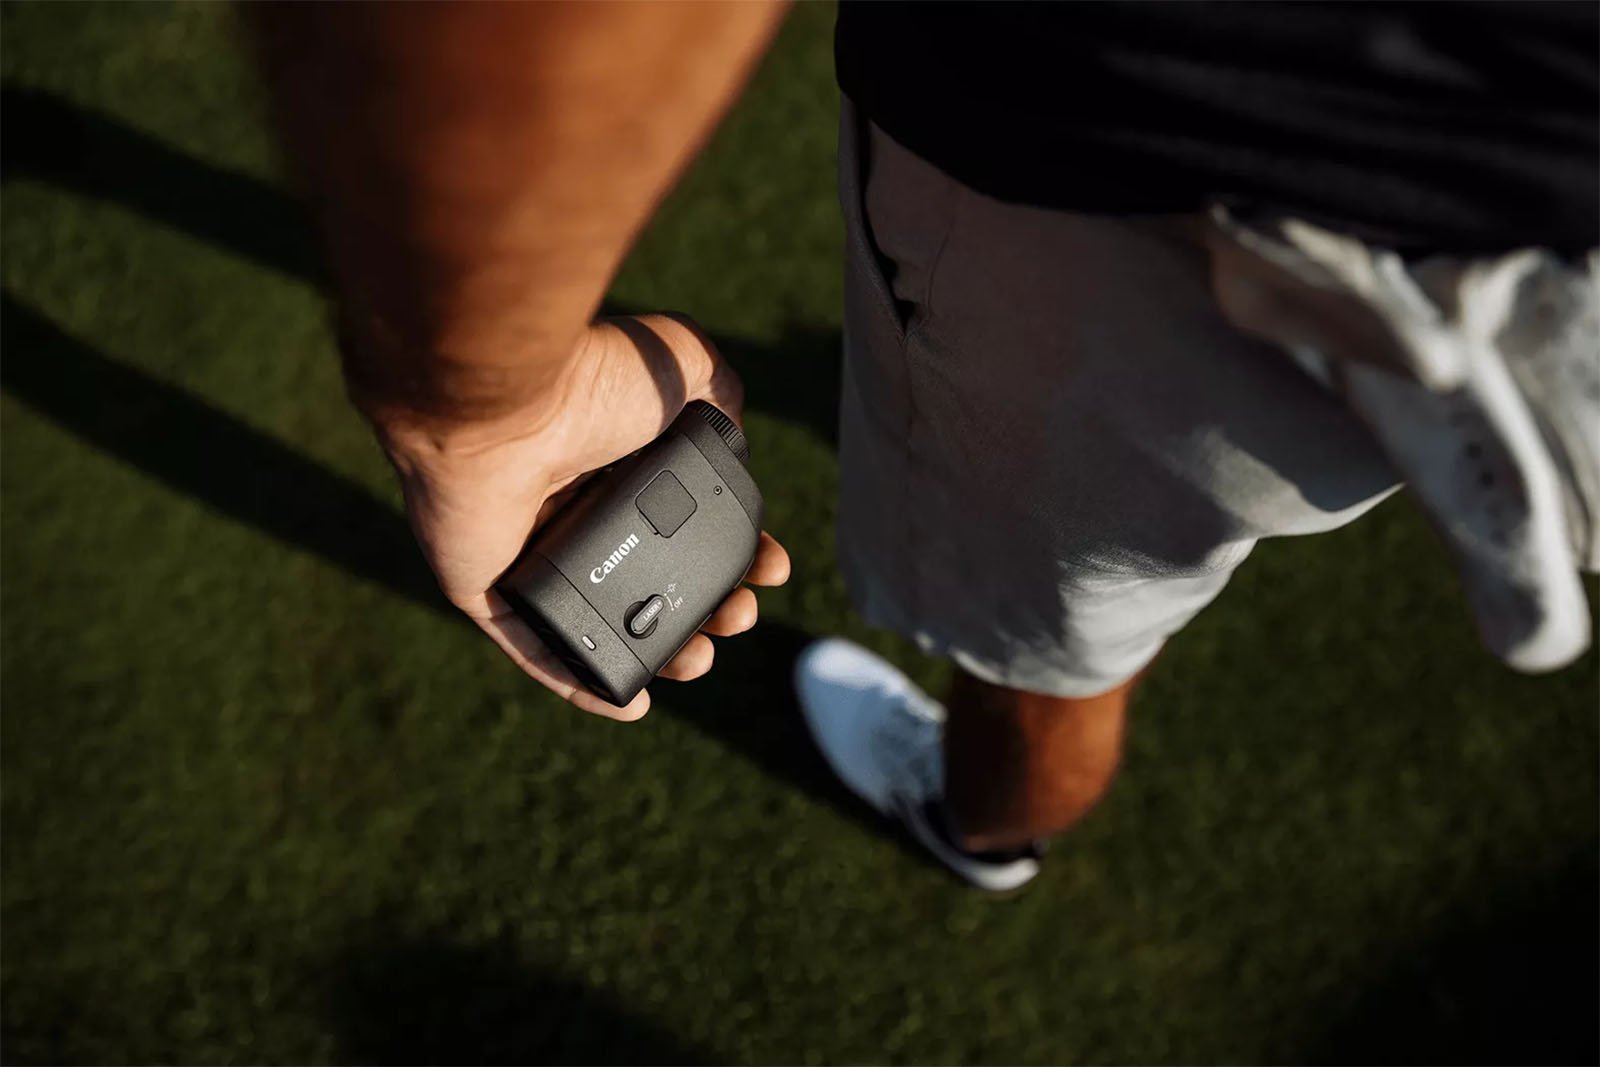 A person holds a Canon rangefinder in their right hand while standing on grass. The individual is wearing a black shirt, light-colored shorts, and white athletic shoes. The perspective is from their point of view looking down at the rangefinder.